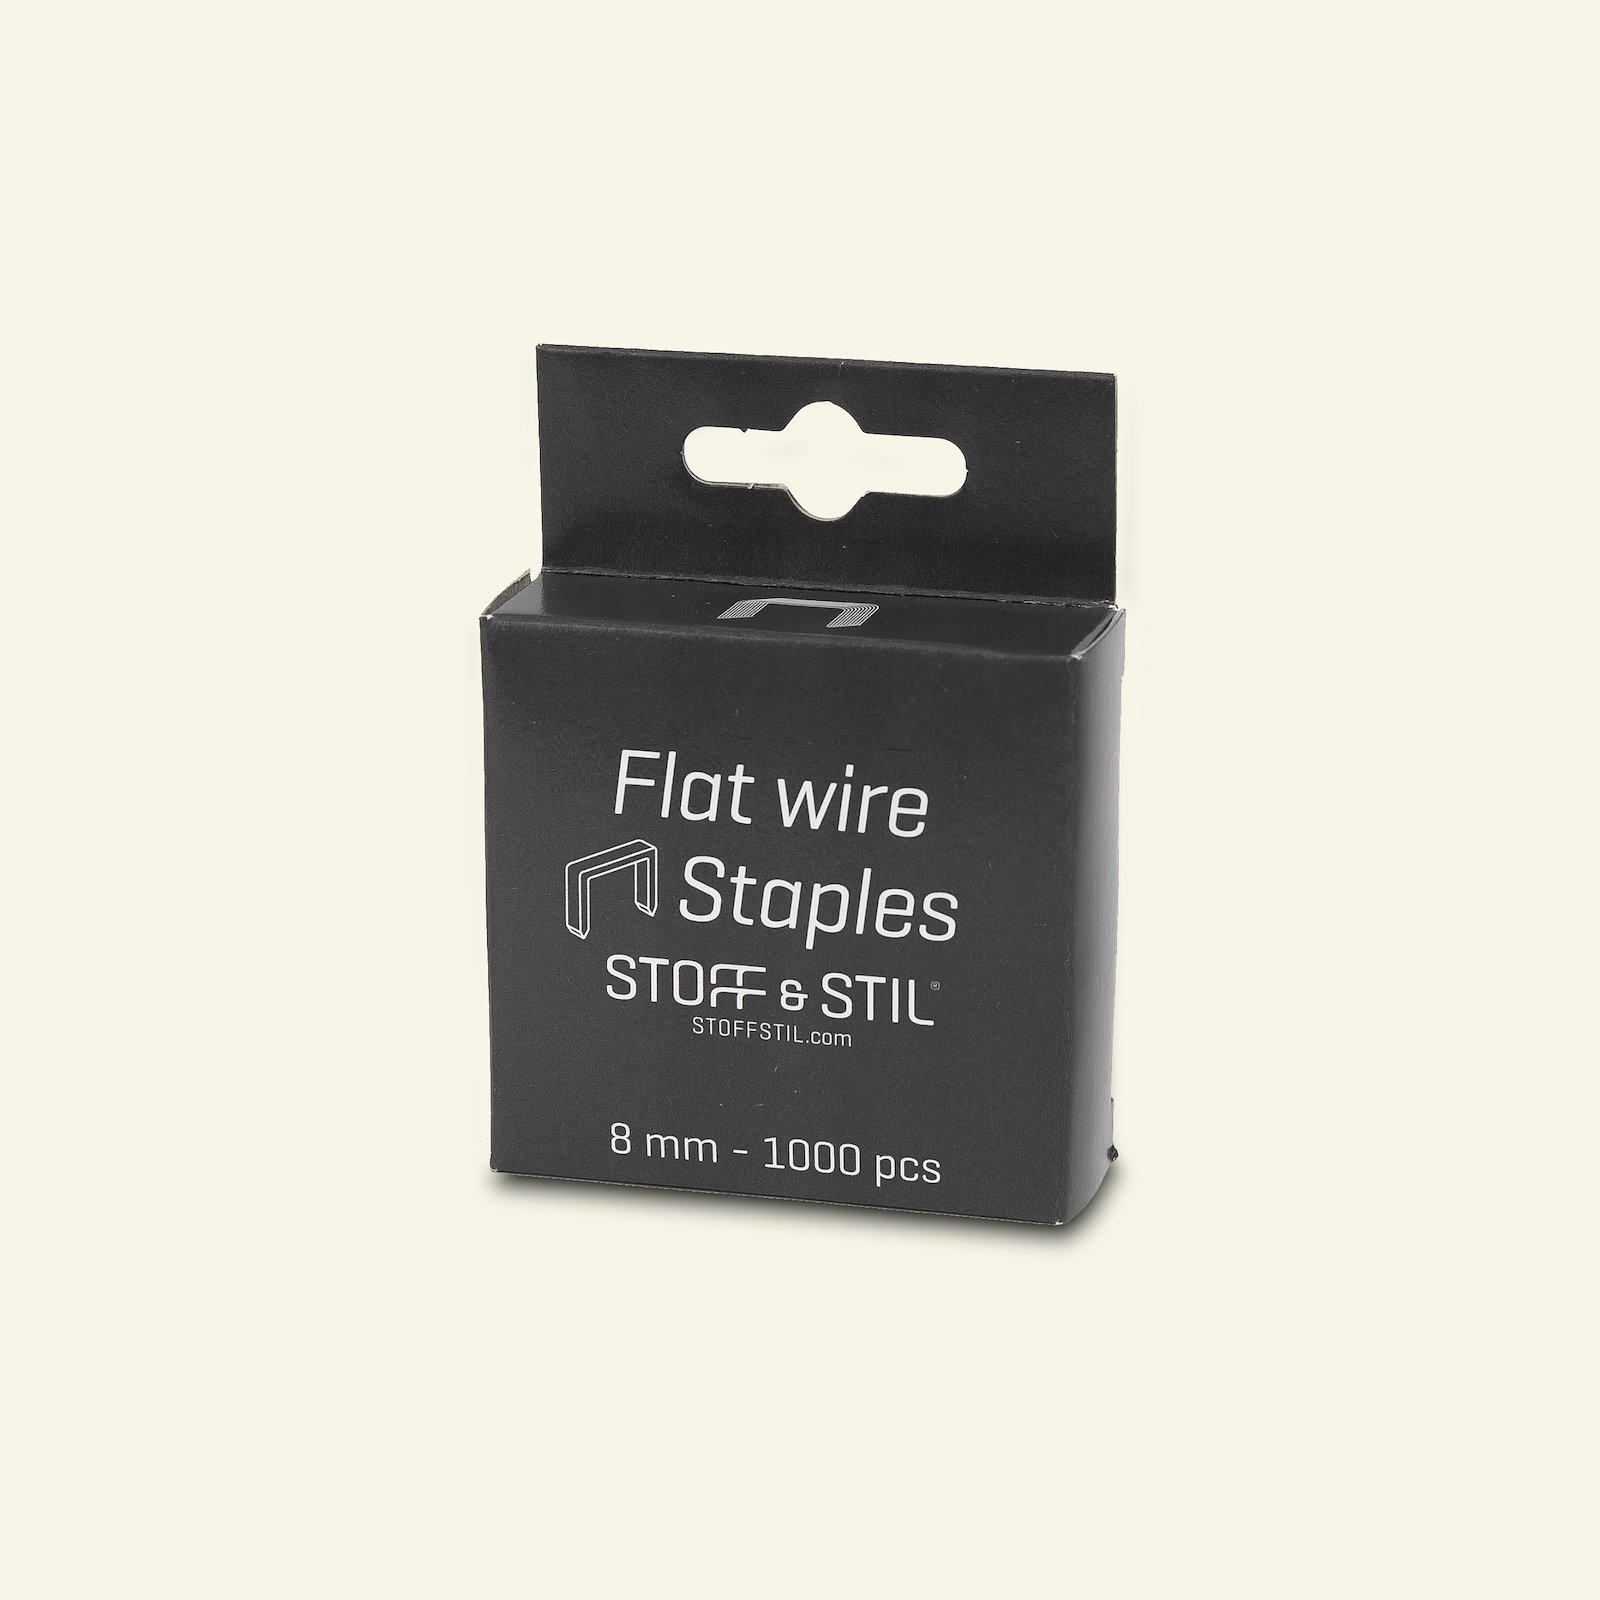 Flat wire stables 8mm for 29811 1000 pcs 29821_pack_b